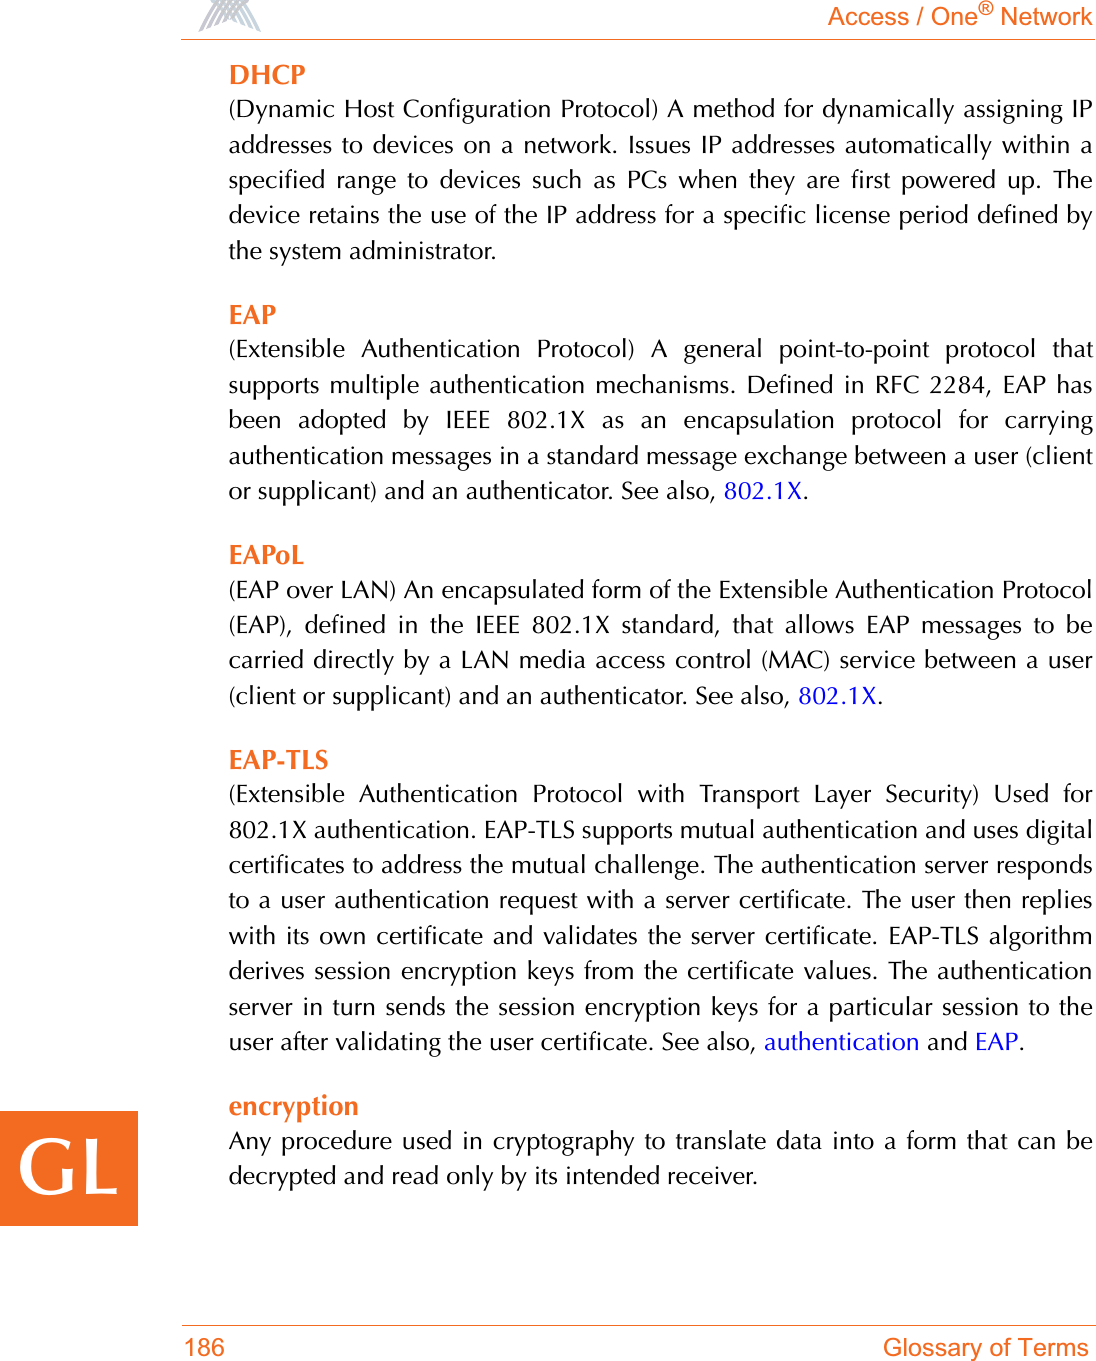 Access / One® Network186 Glossary of TermsGLDHCP(Dynamic Host Configuration Protocol) A method for dynamically assigning IPaddresses to devices on a network. Issues IP addresses automatically within aspecified range to devices such as PCs when they are first powered up. Thedevice retains the use of the IP address for a specific license period defined bythe system administrator.EAP(Extensible Authentication Protocol) A general point-to-point protocol thatsupports multiple authentication mechanisms. Defined in RFC 2284, EAP hasbeen adopted by IEEE 802.1X as an encapsulation protocol for carryingauthentication messages in a standard message exchange between a user (clientor supplicant) and an authenticator. See also, 802.1X.EAPoL(EAP over LAN) An encapsulated form of the Extensible Authentication Protocol(EAP), defined in the IEEE 802.1X standard, that allows EAP messages to becarried directly by a LAN media access control (MAC) service between a user(client or supplicant) and an authenticator. See also, 802.1X.EAP-TLS(Extensible Authentication Protocol with Transport Layer Security) Used for802.1X authentication. EAP-TLS supports mutual authentication and uses digitalcertificates to address the mutual challenge. The authentication server respondsto a user authentication request with a server certificate. The user then replieswith its own certificate and validates the server certificate. EAP-TLS algorithmderives session encryption keys from the certificate values. The authenticationserver in turn sends the session encryption keys for a particular session to theuser after validating the user certificate. See also, authentication and EAP.encryptionAny procedure used in cryptography to translate data into a form that can bedecrypted and read only by its intended receiver. 